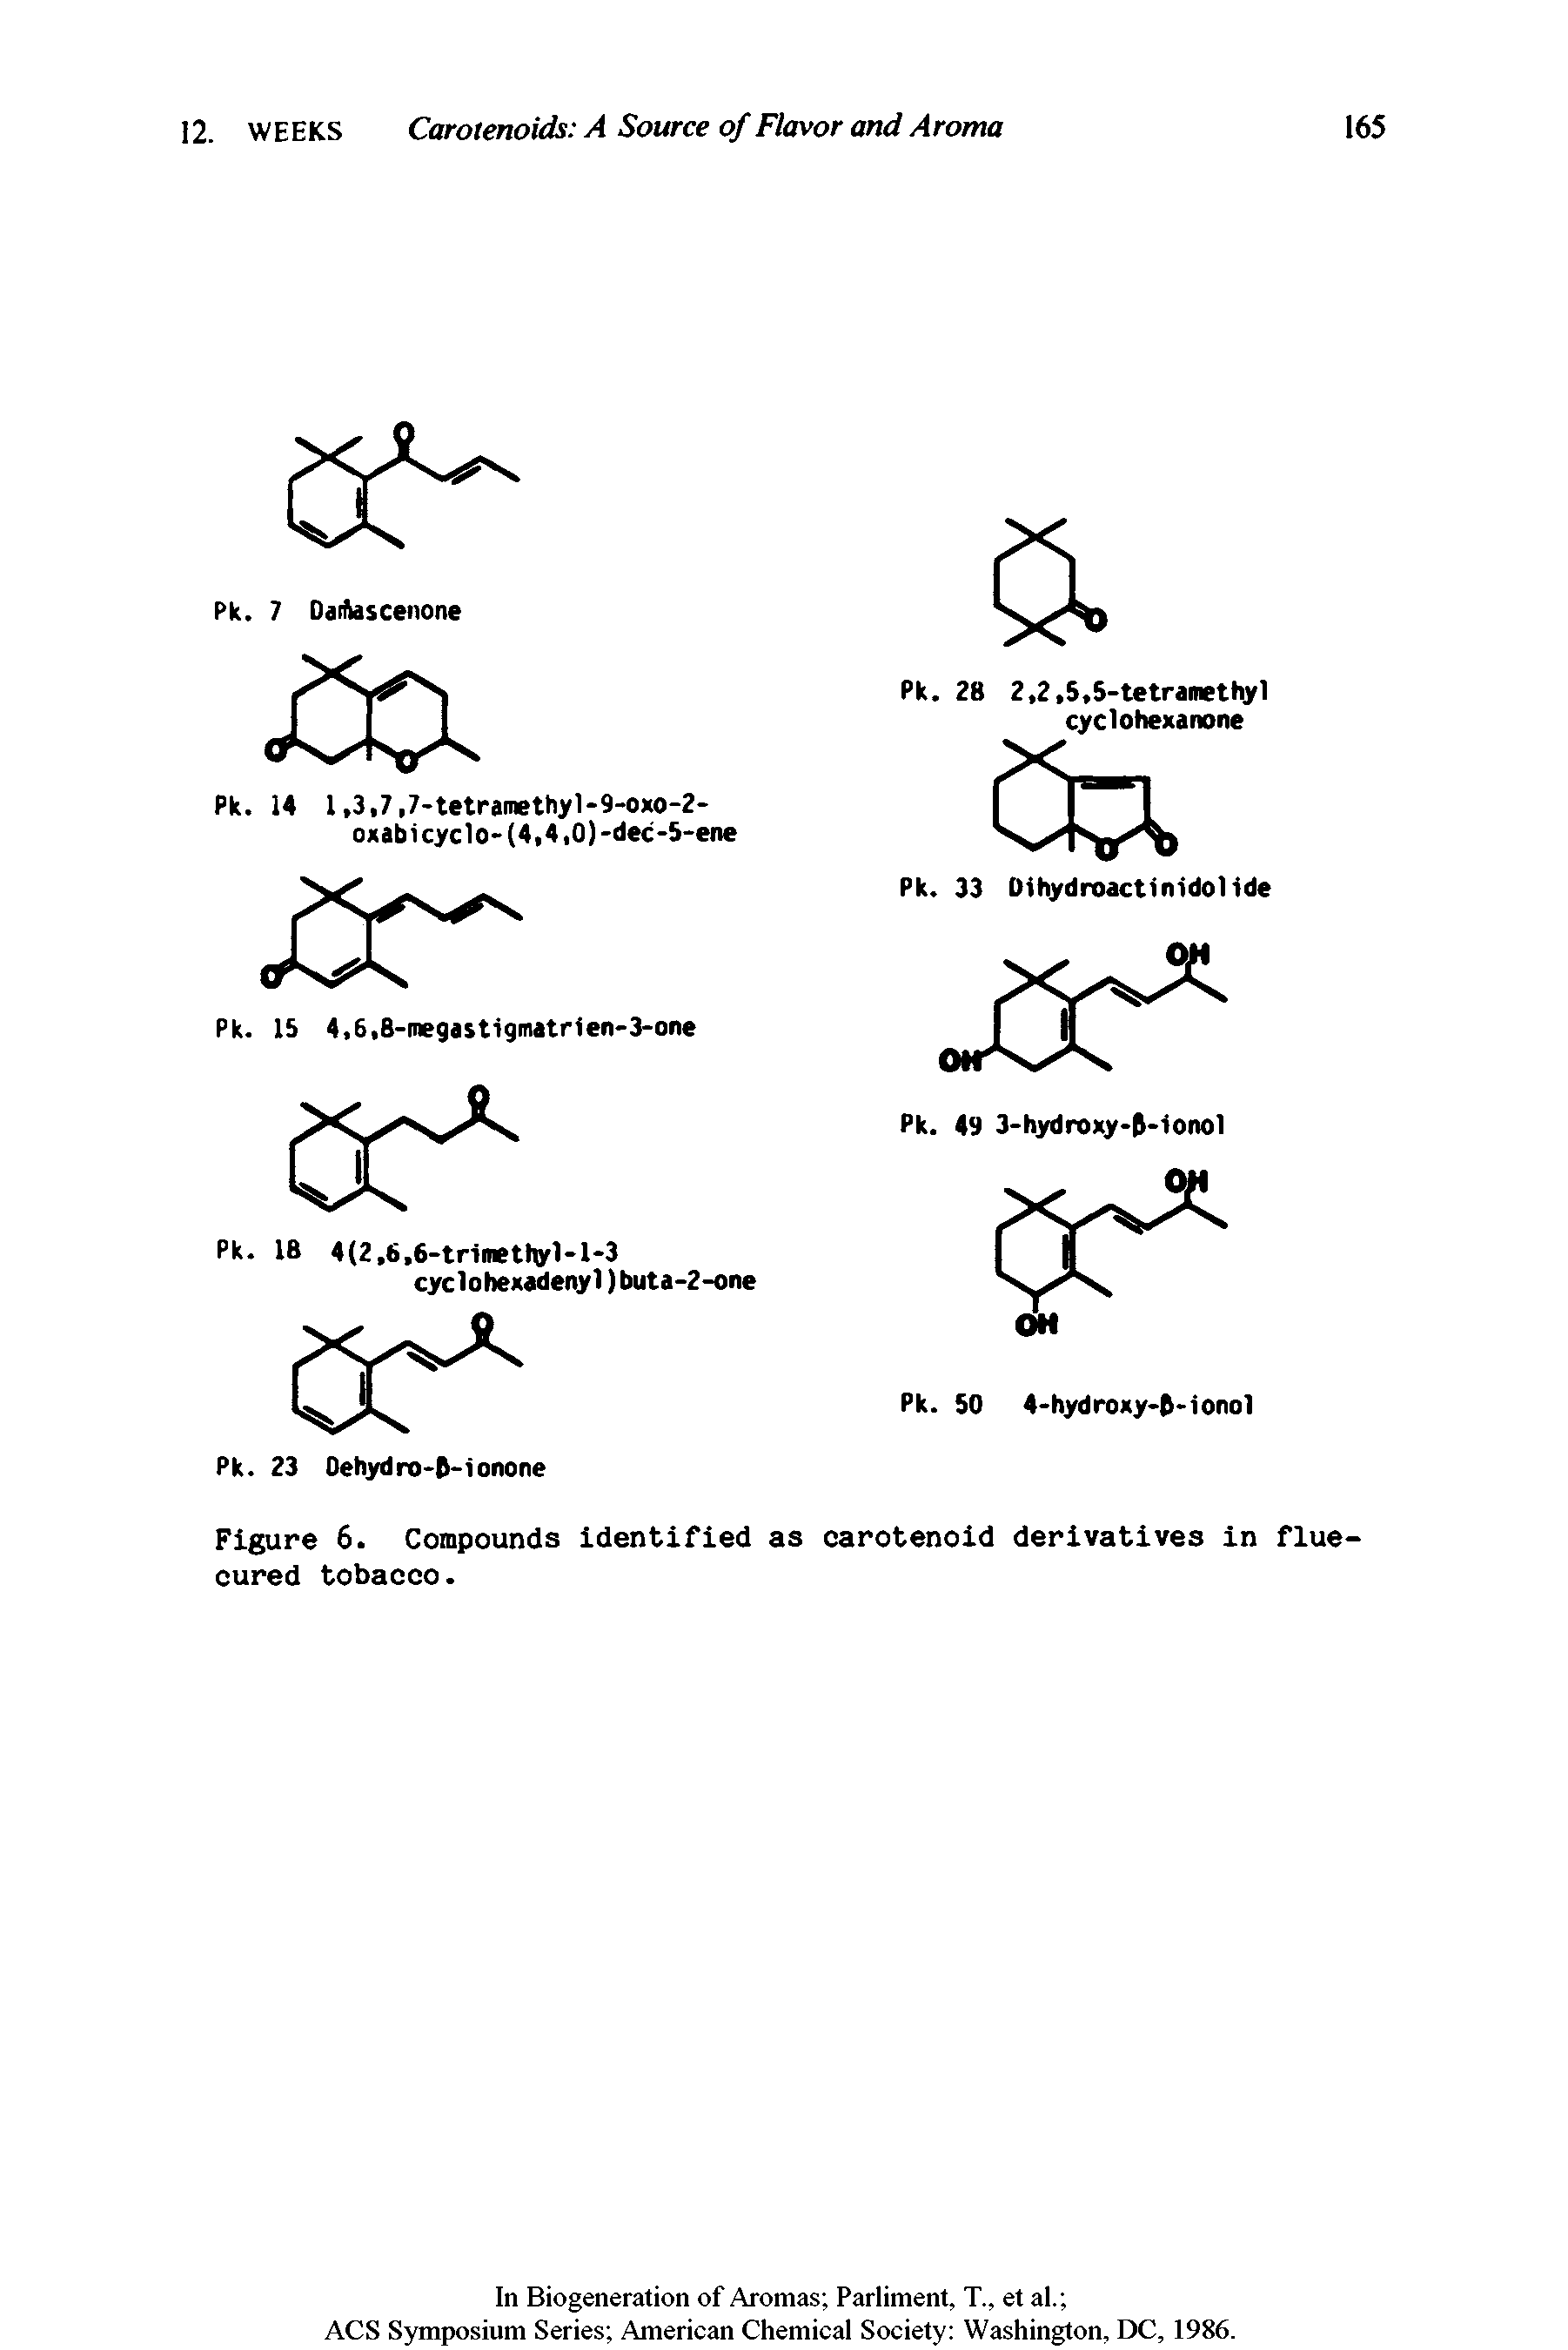 Figure 6. Compounds identified as carotenoid derivatives in flue-cured tobacco.